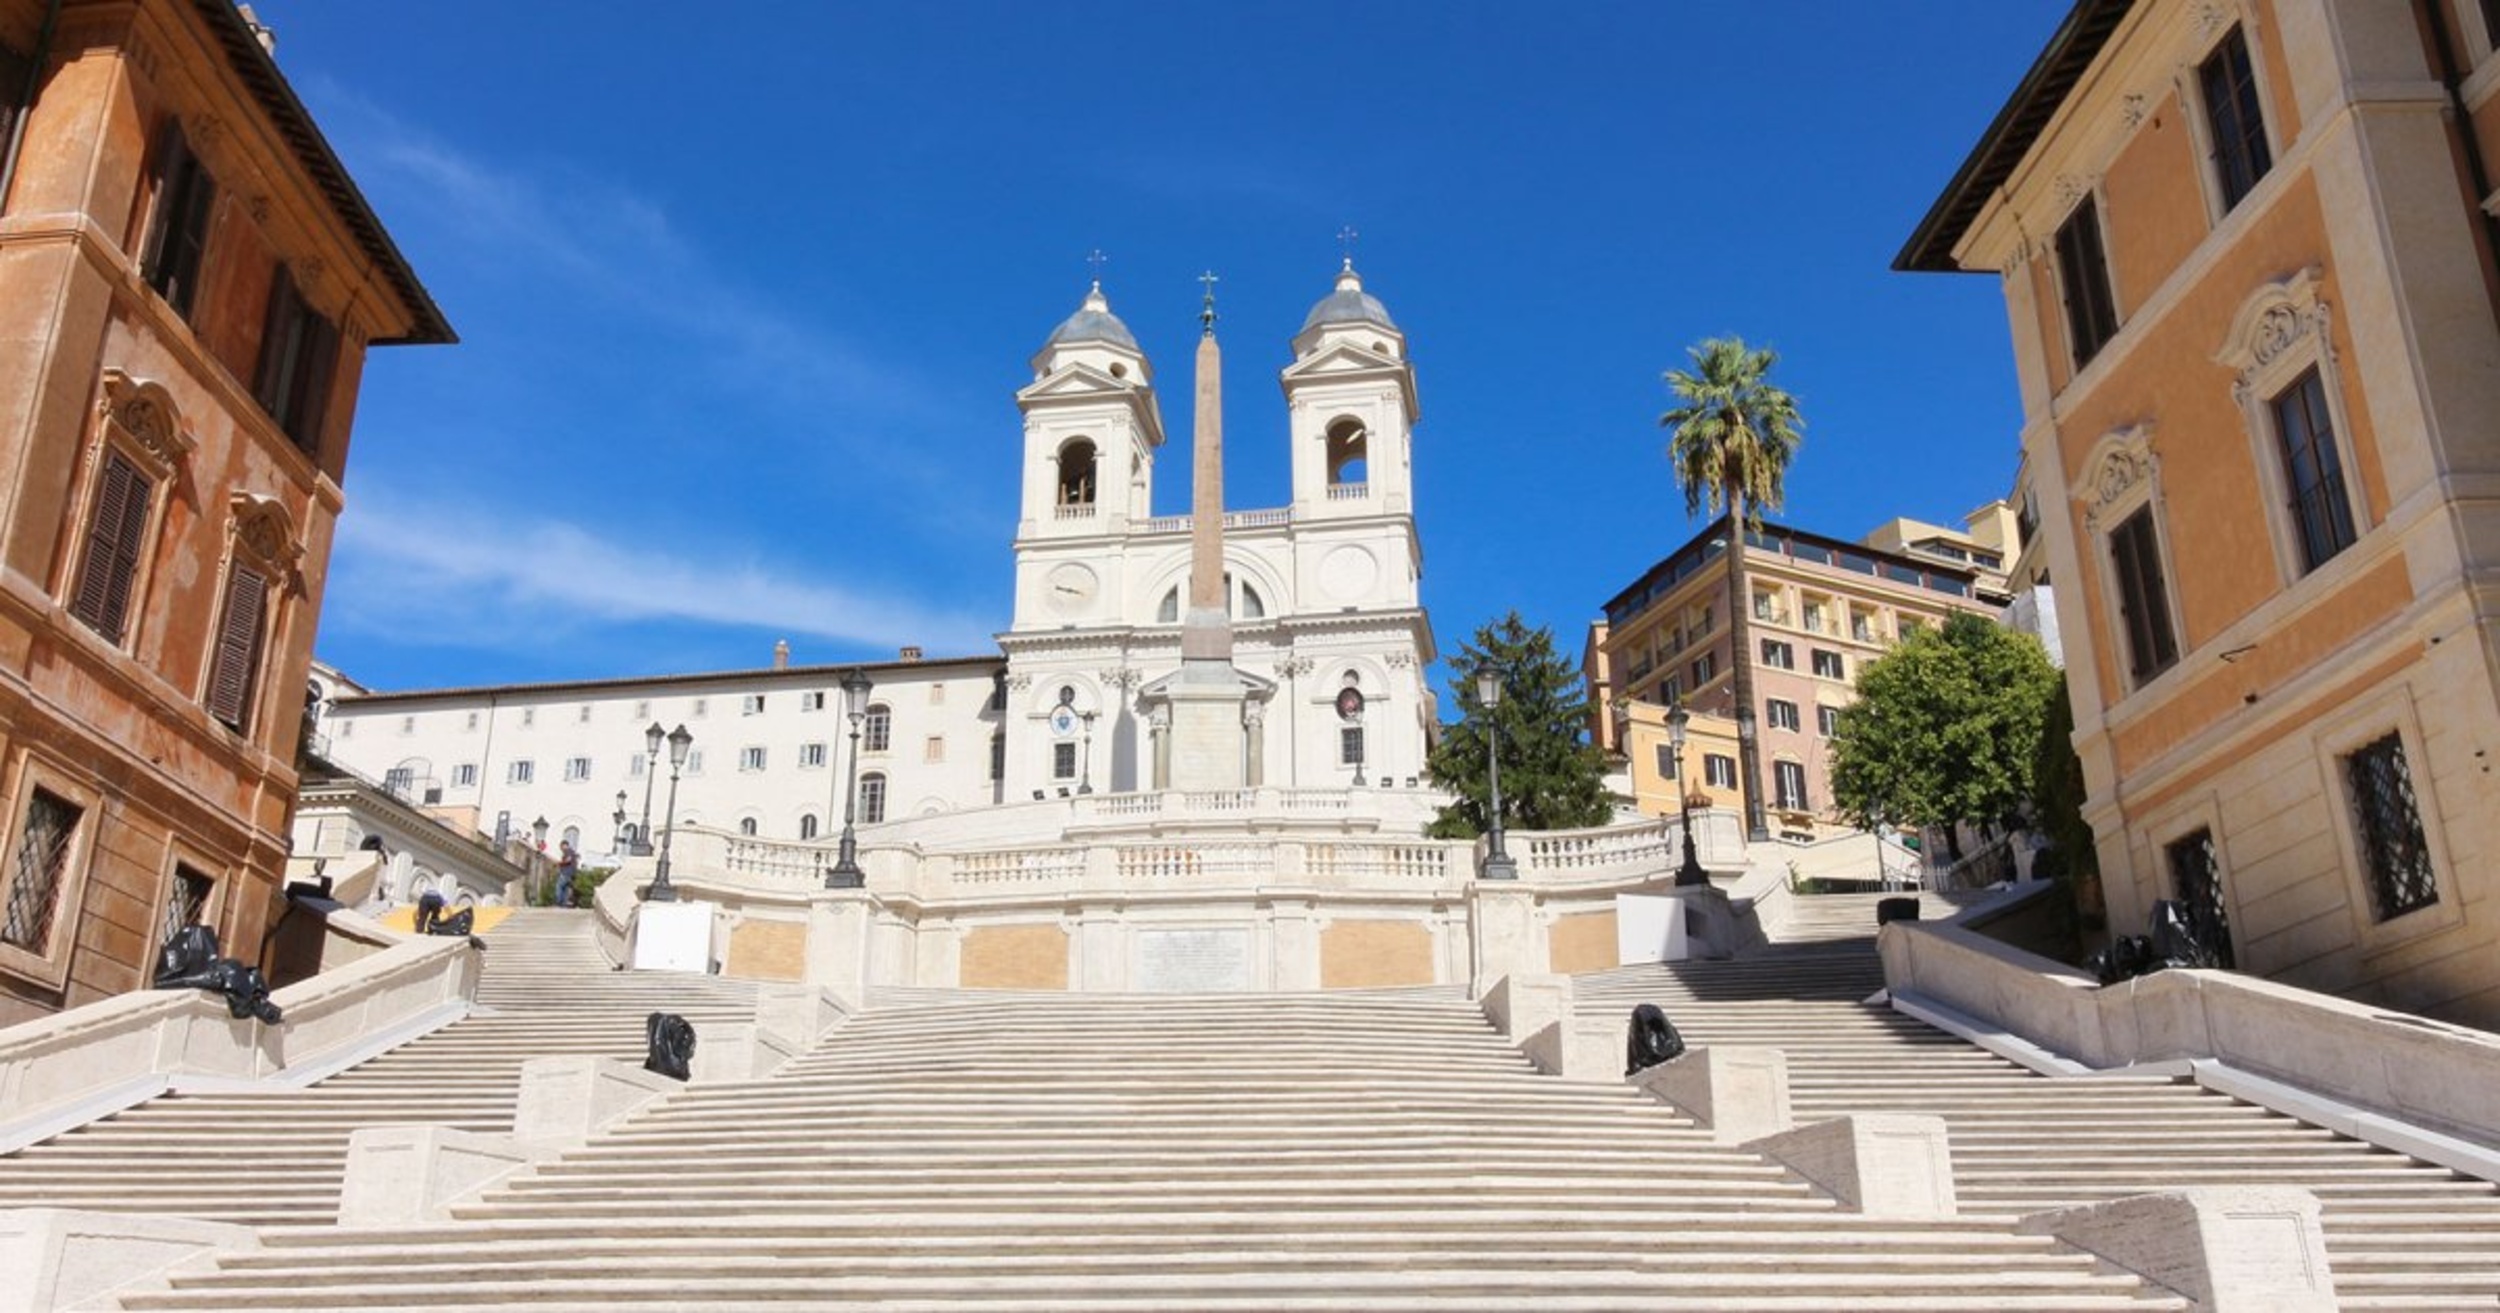 <p>Walking is the perfect way to burn off pasta, so the Spanish Steps make for a perfect afternoon activity. The staircase connecting Piazza di Spagna to the Spanish Embassy is filled with magical sights, from kids splashing in the fountain to emeralds glowing in the embassy. </p><p>You may also like: <a href='https://www.yardbarker.com/lifestyle/articles/21_ooey_gooey_cheese_recipes_you_can_make_at_home_090423/s1__37569026'>21 ooey-gooey cheese recipes you can make at home</a></p>